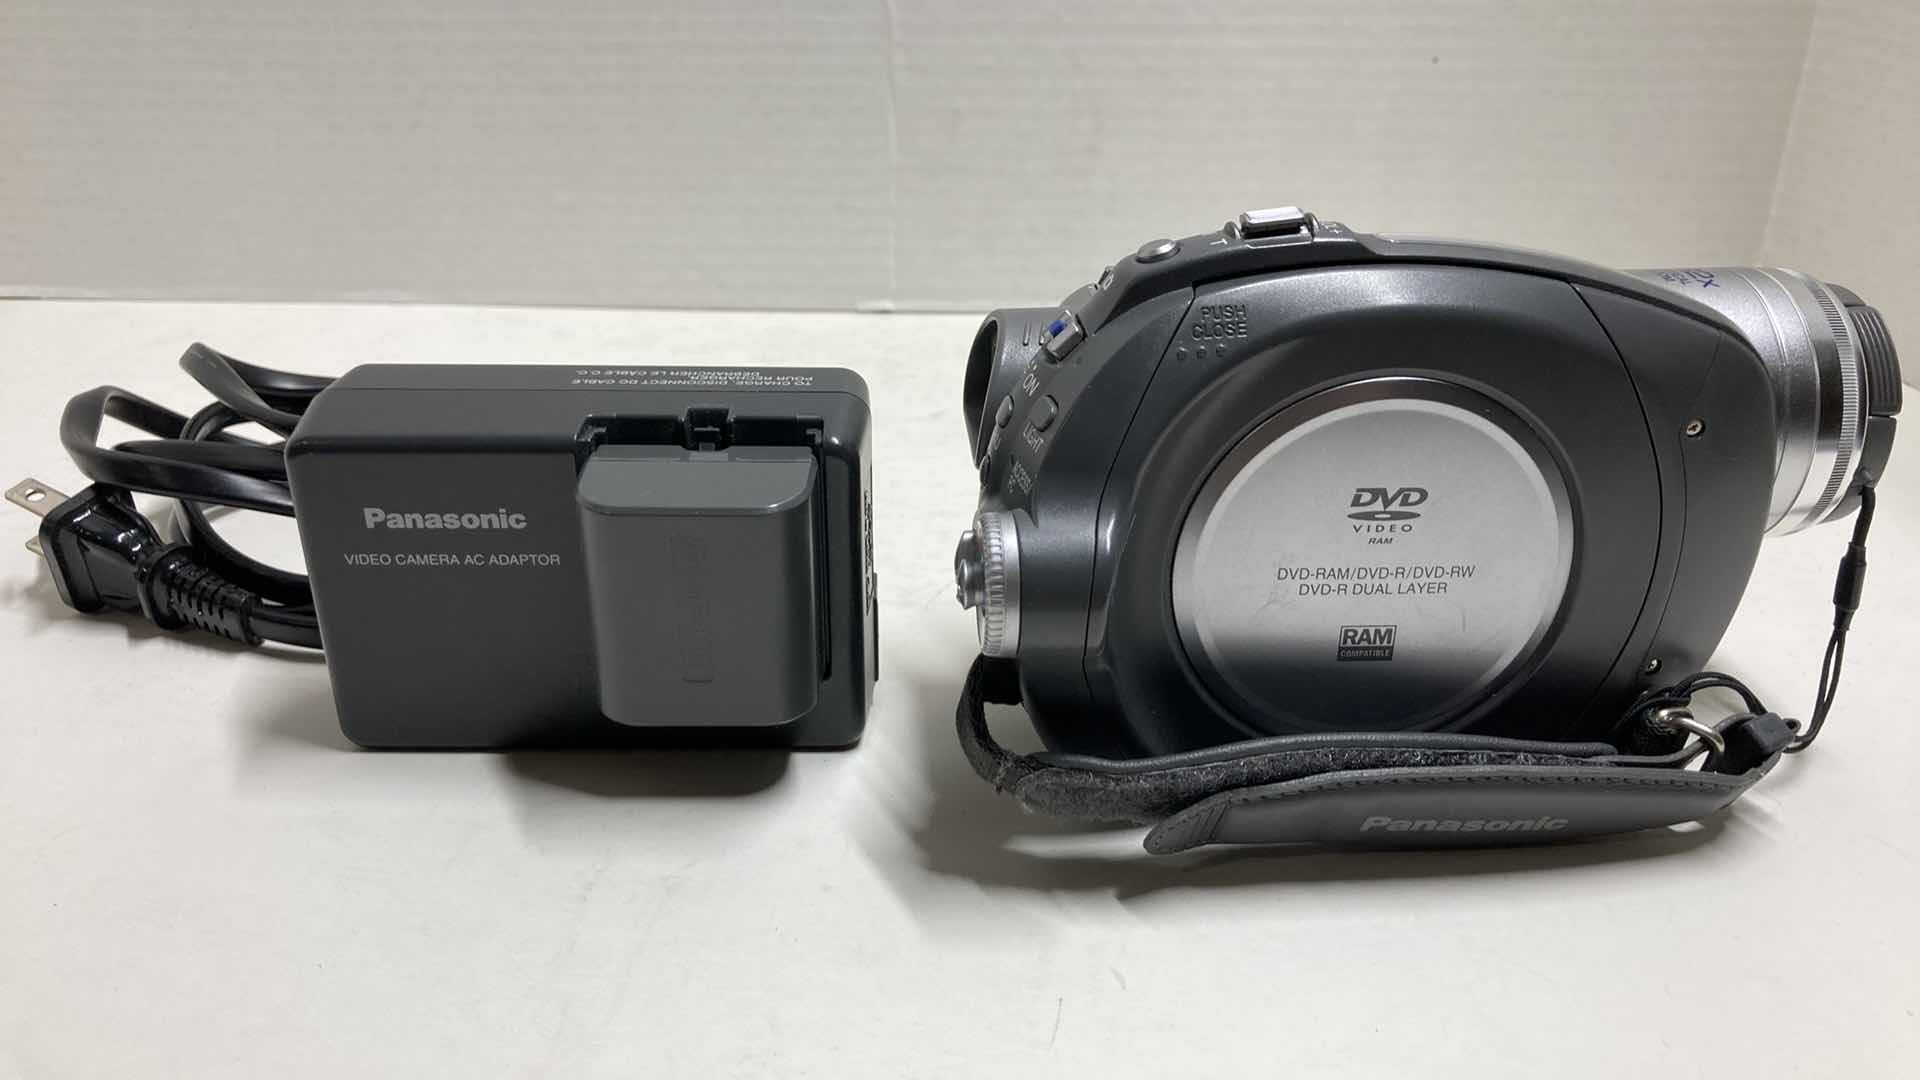 Photo 3 of PANASONIC DVD VIDEO CAMERA MODEL VDR-D220 & CANON POWERSHOT DIGITAL CAMERA MODEL SD750 W CHARGERS, BATTERIES & EXPEDITION OUTFITTERS CAMERA BAG